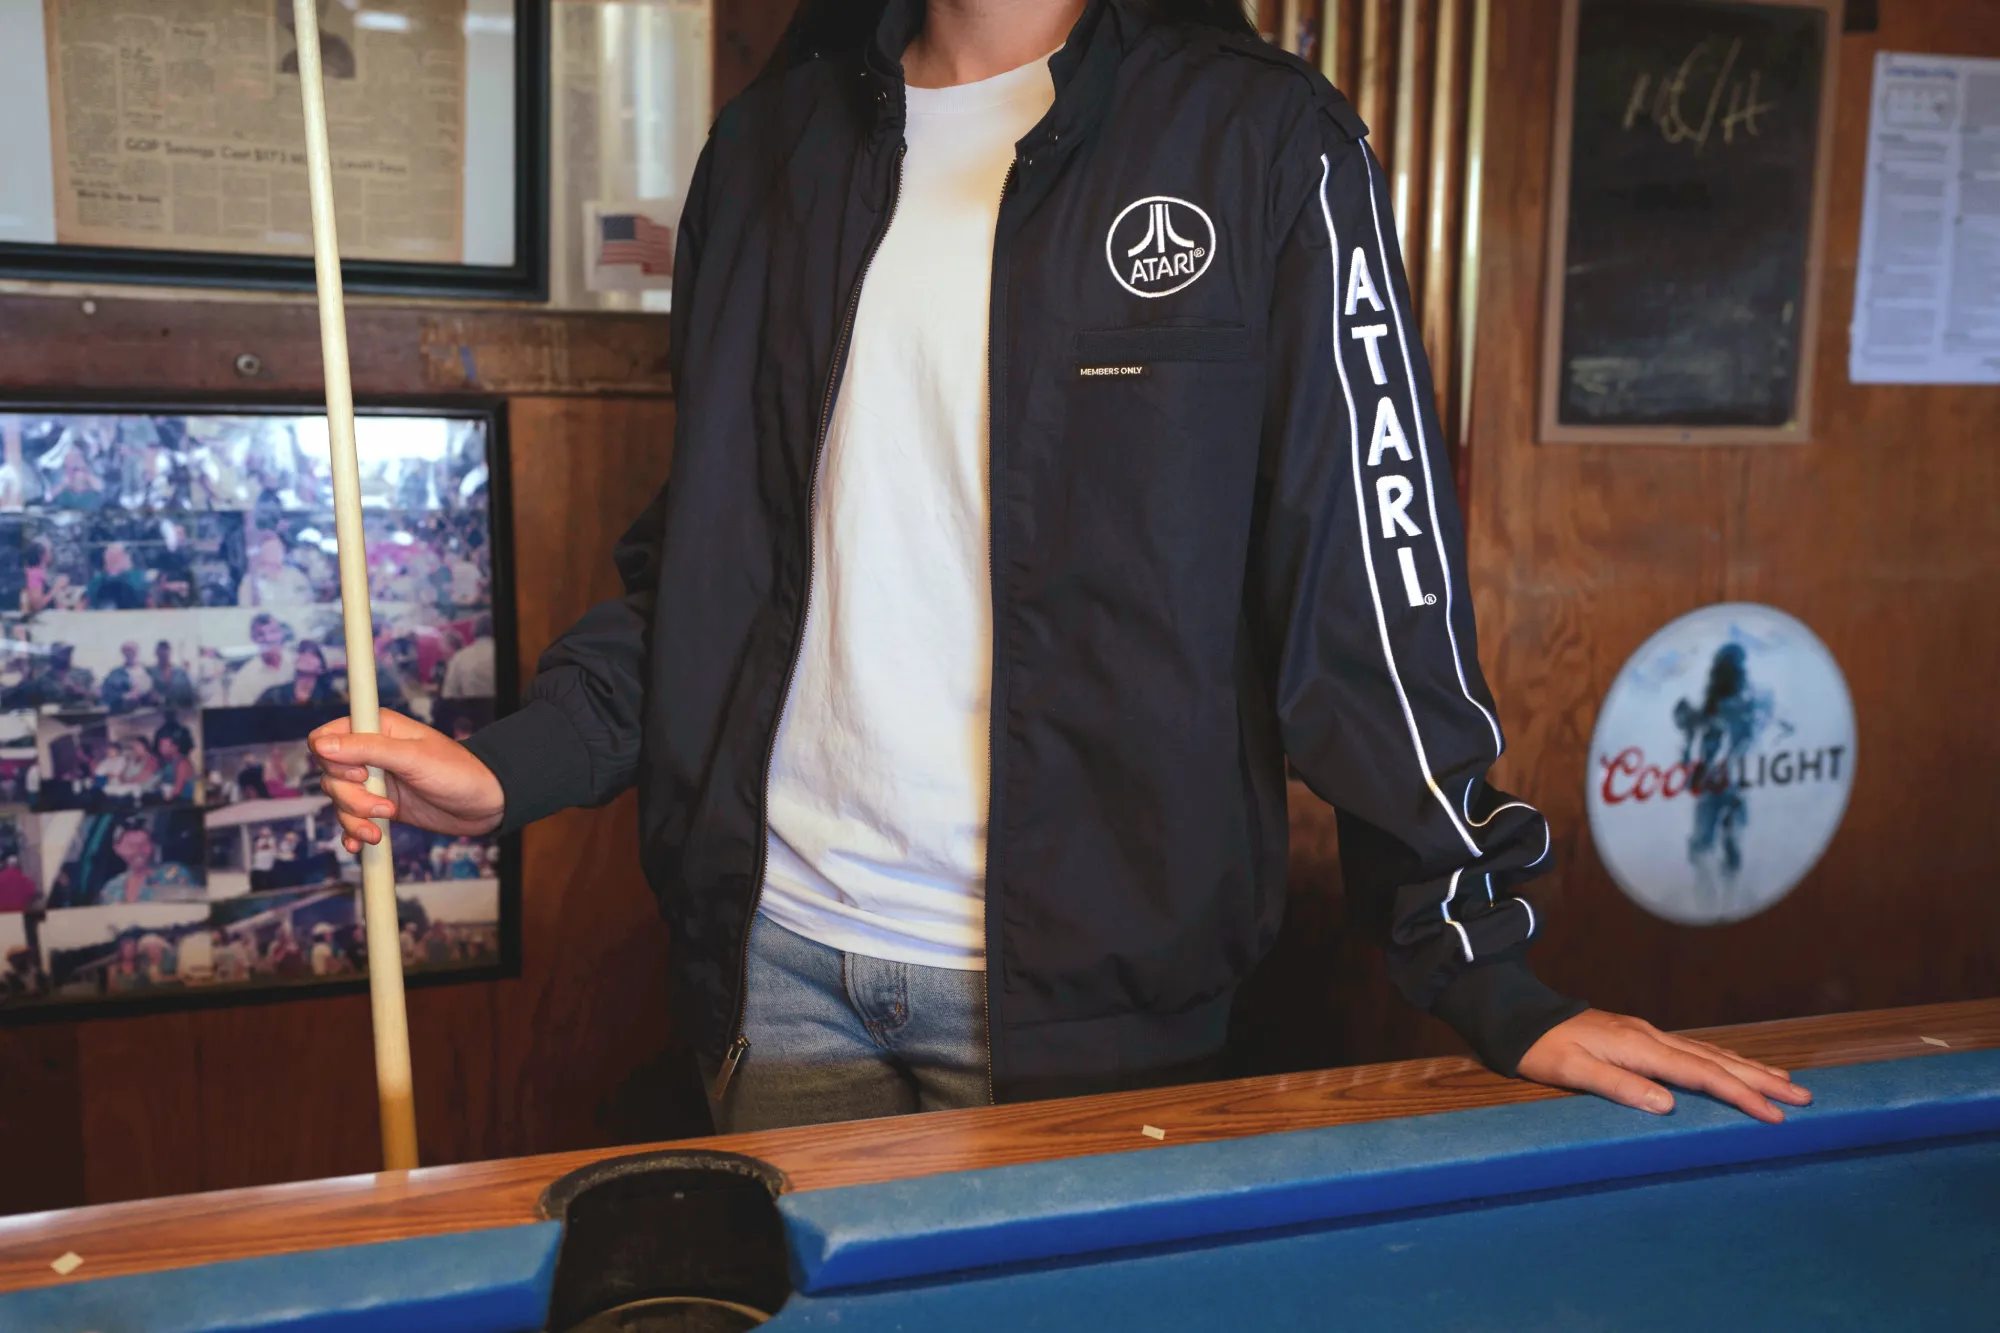 Photograph of man from neck down wearing navy and silver Atari jacket unzipped with white tshirt underneath. He holds a pool cue and has one hand resting on a blue pool table.